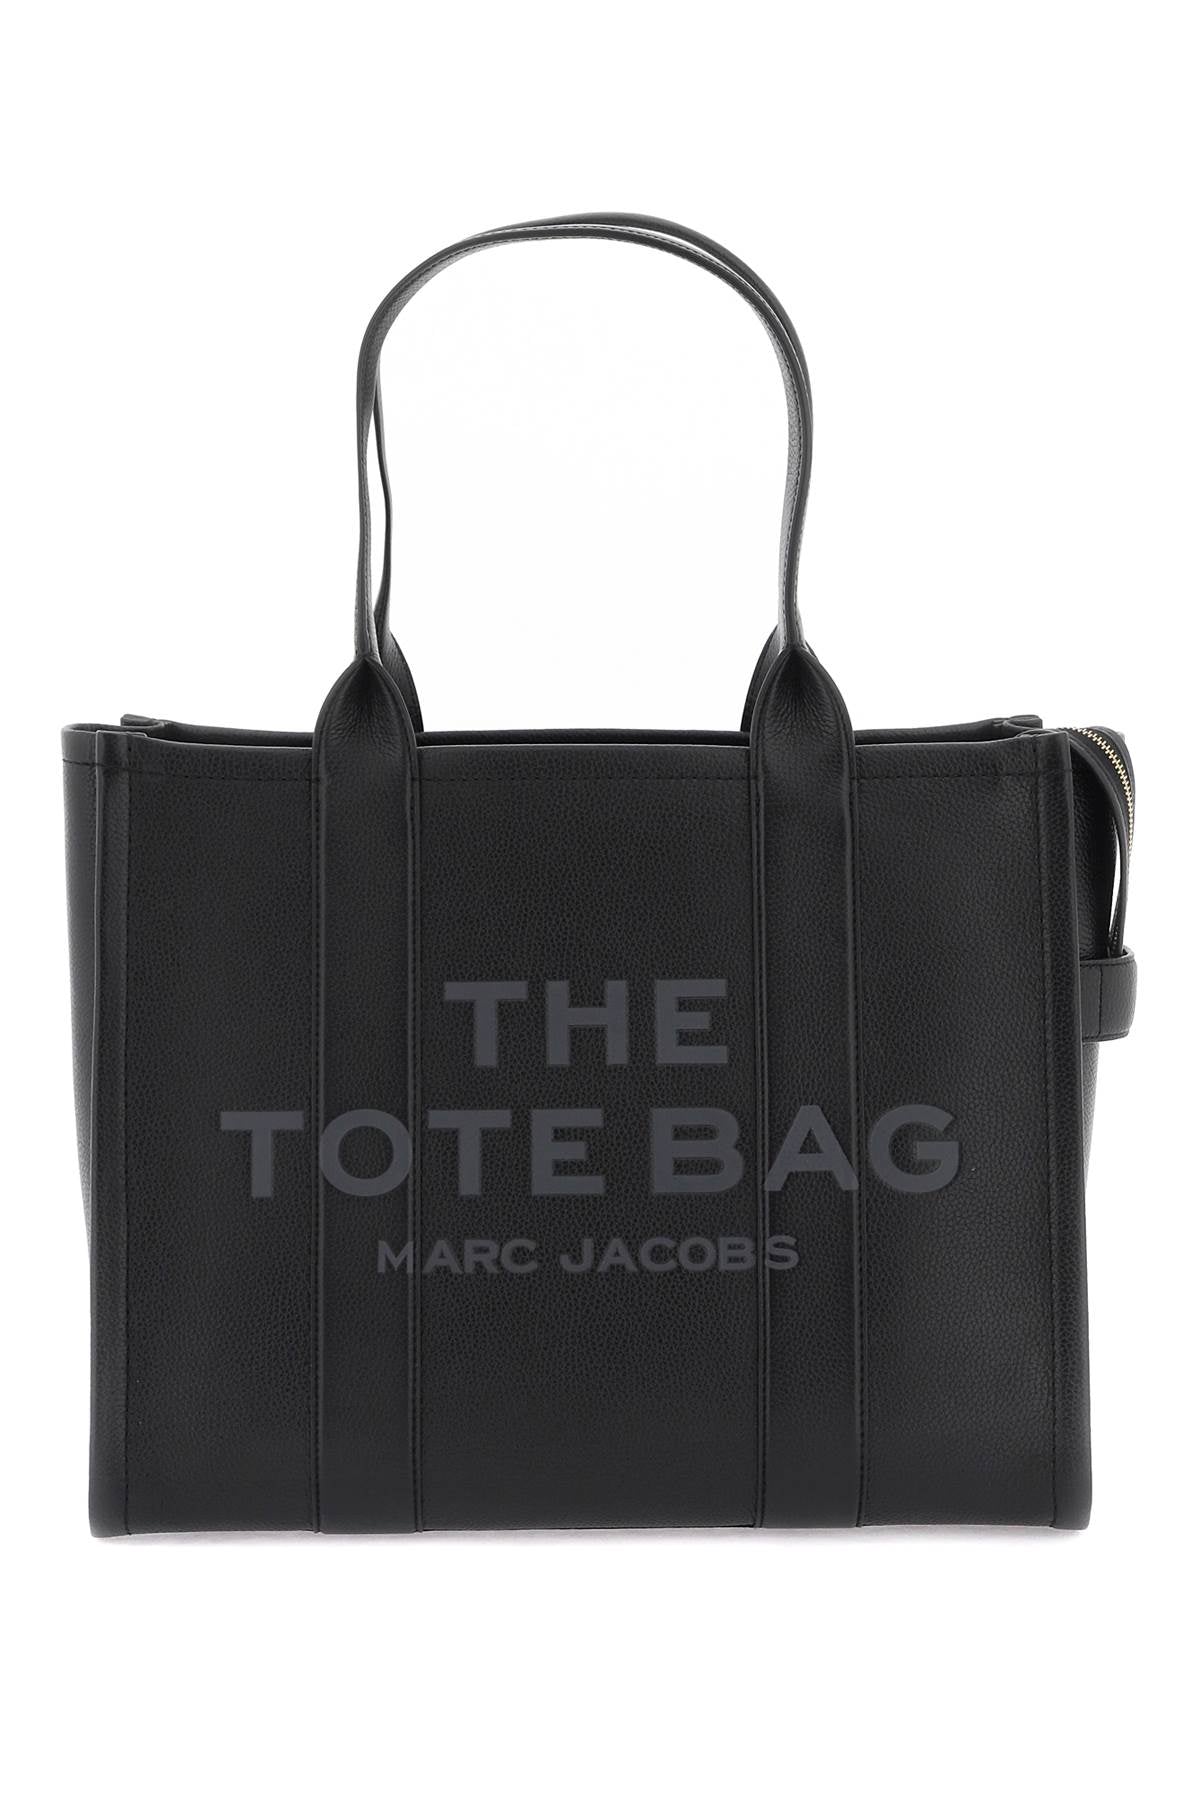 MARC JACOBS Large Black Leather Tote Bag with Gold Accents and Contrast Logo